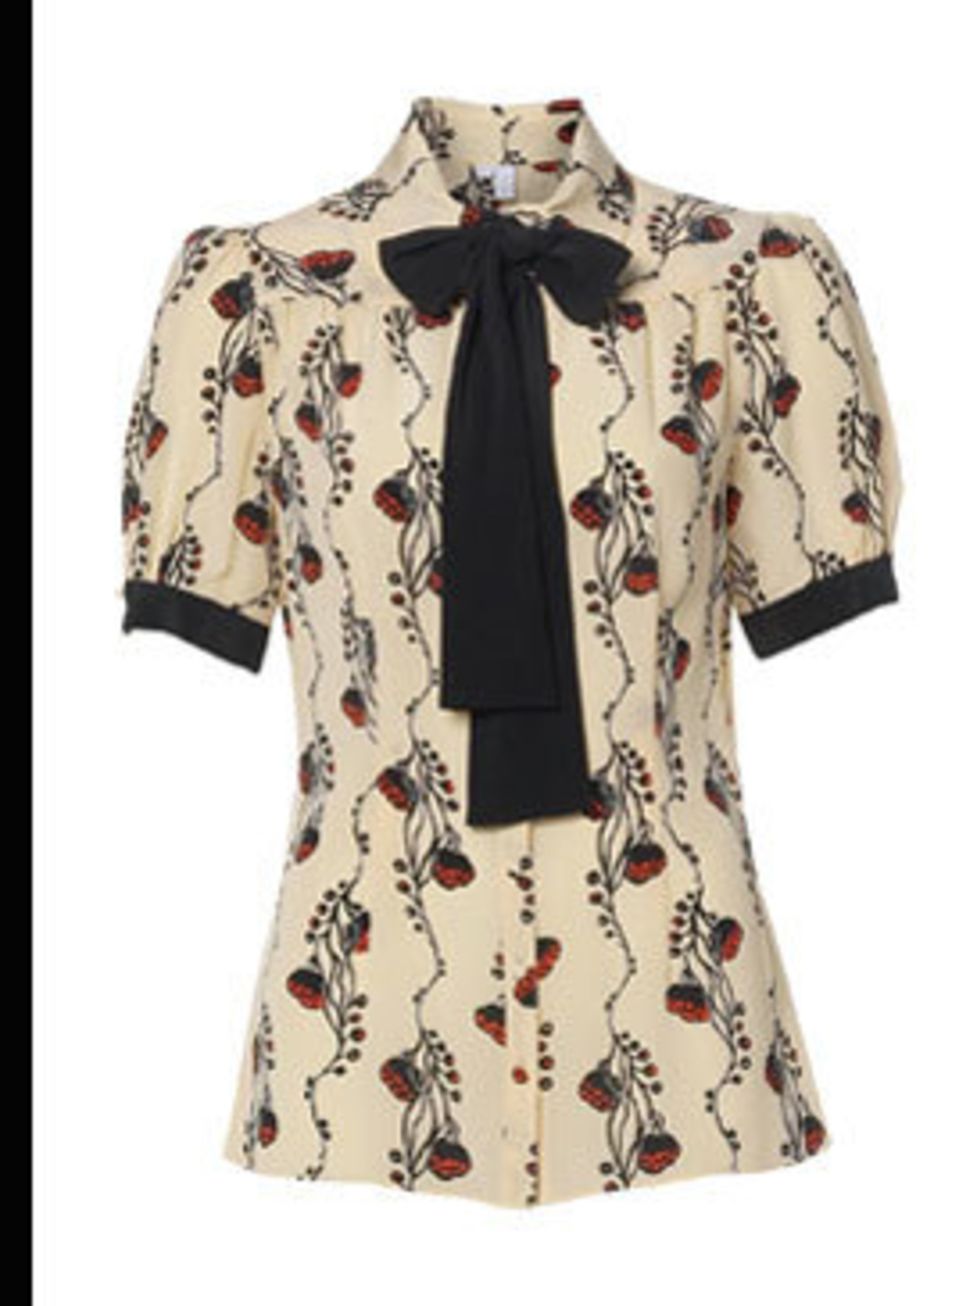 <p>Silk printed blouse, £45 from Untold at House of Fraser for stockists call 0870 1607270</p>